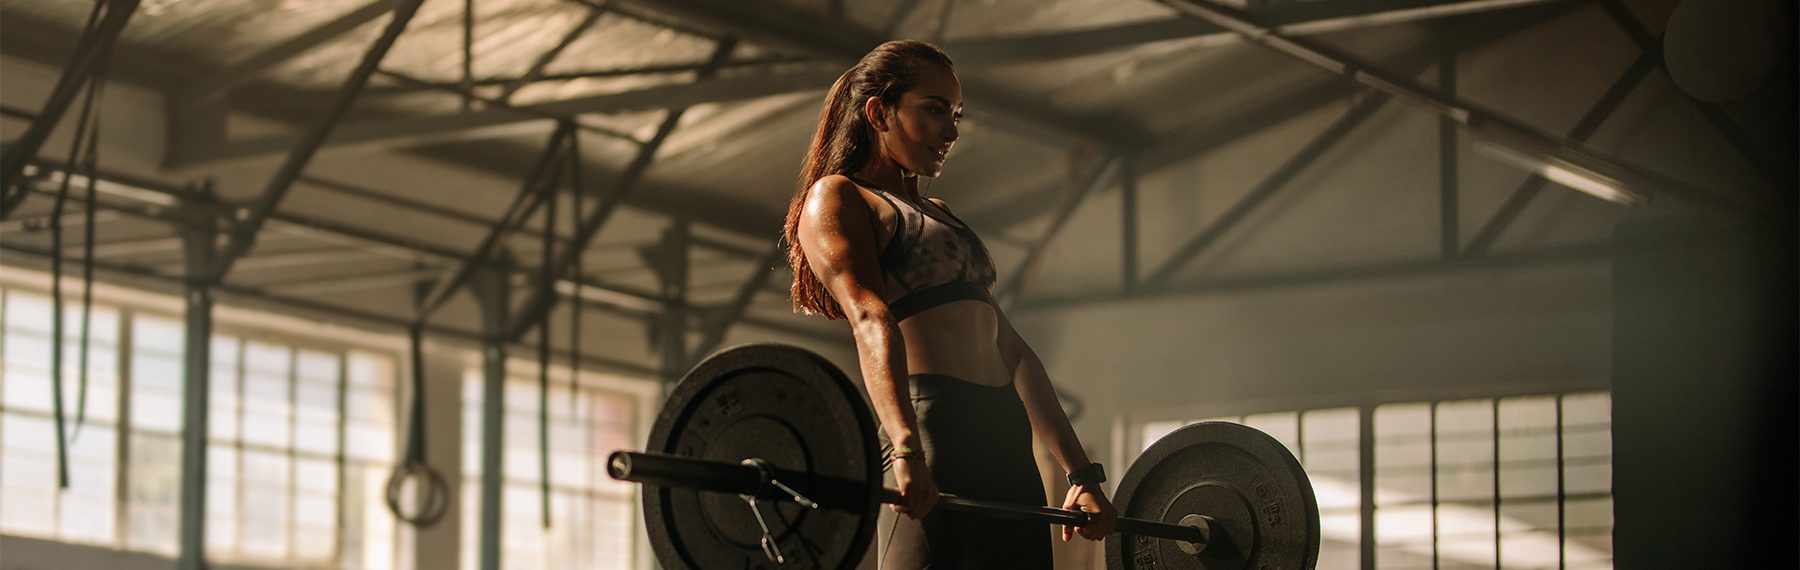 Strong female athlete holding a barbell in her hands. gym woman lifting heavy weights in gym.